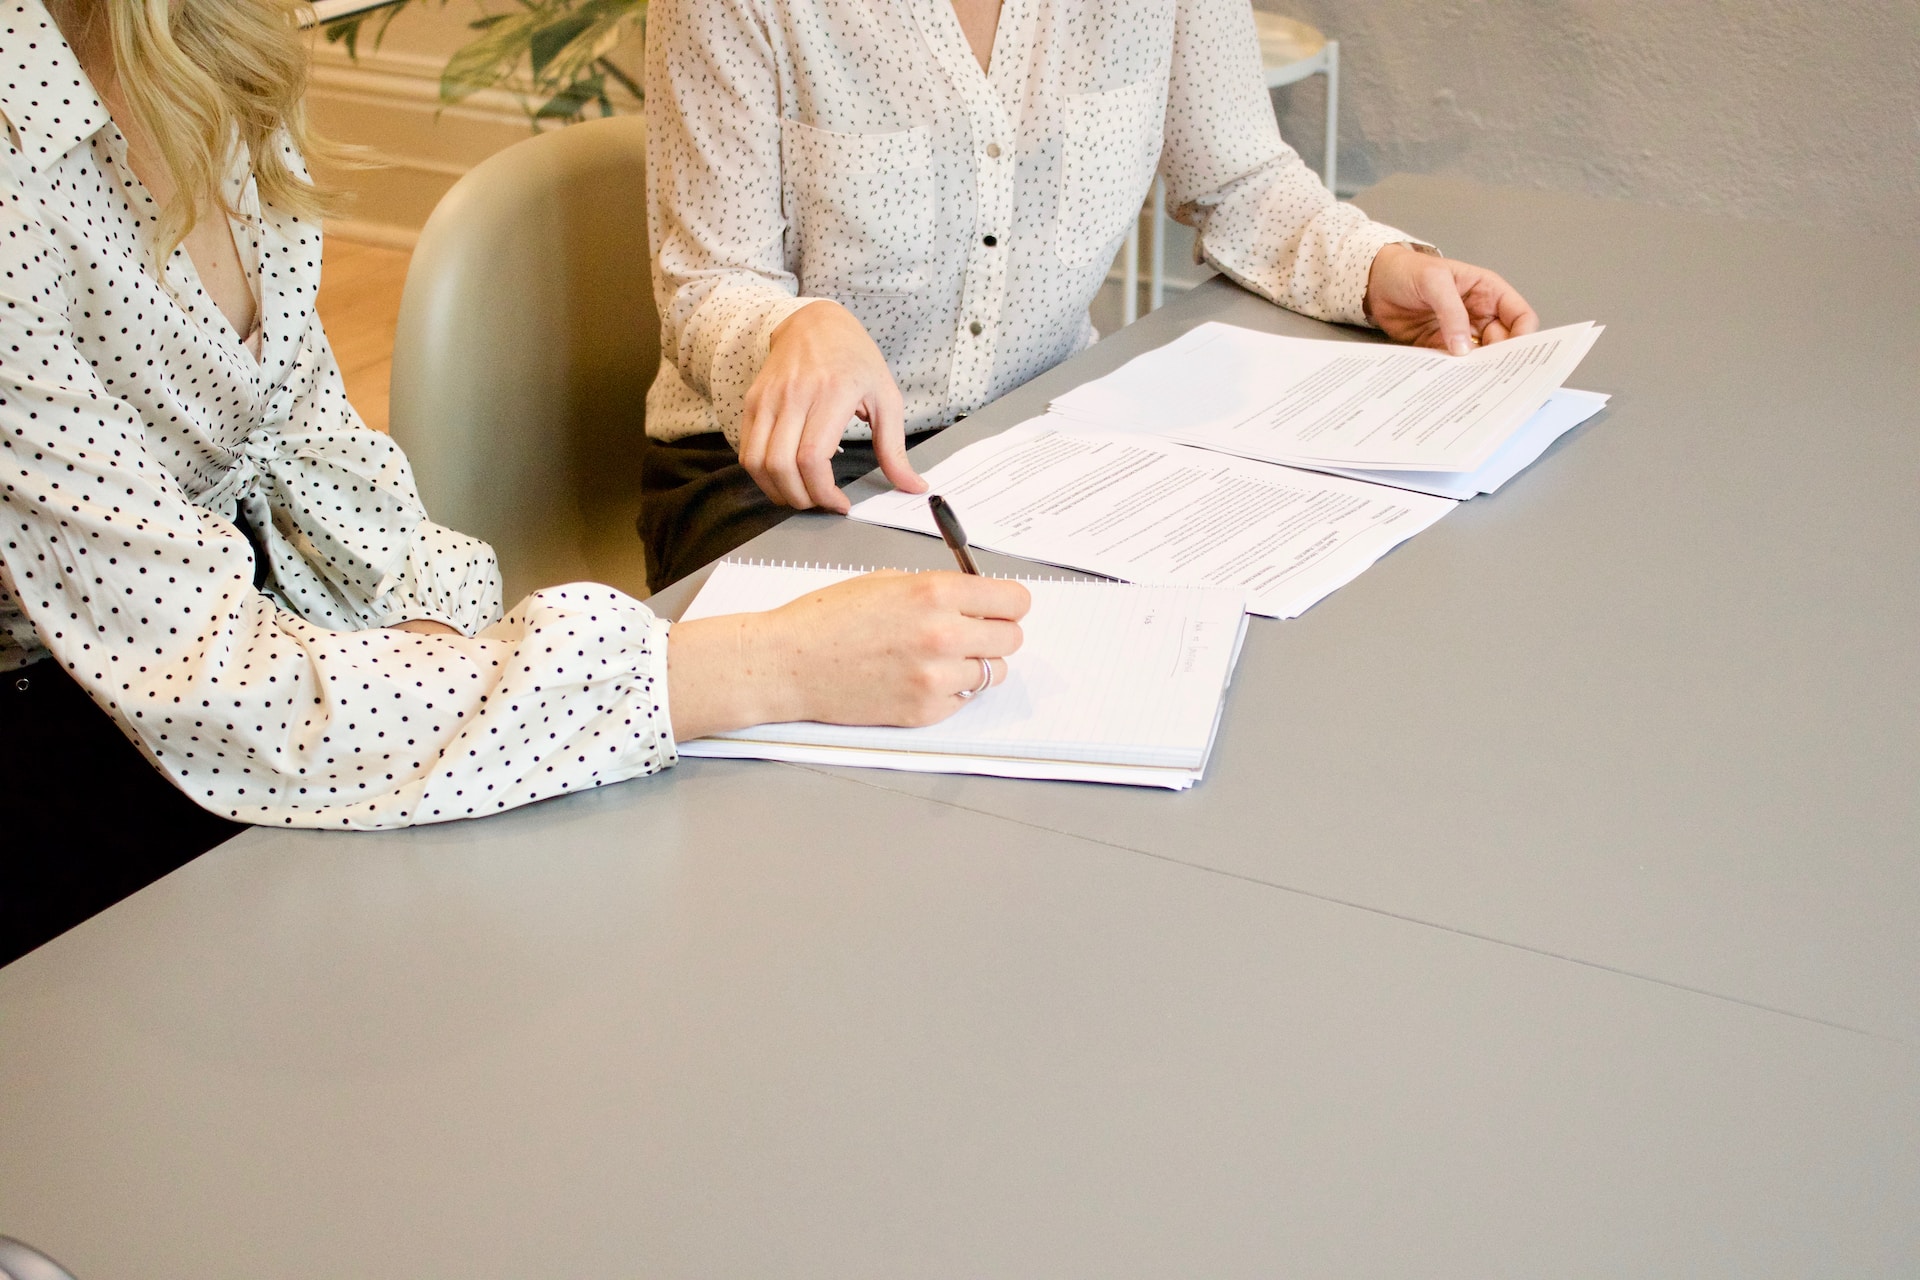 Two women at a table, one signing a form 